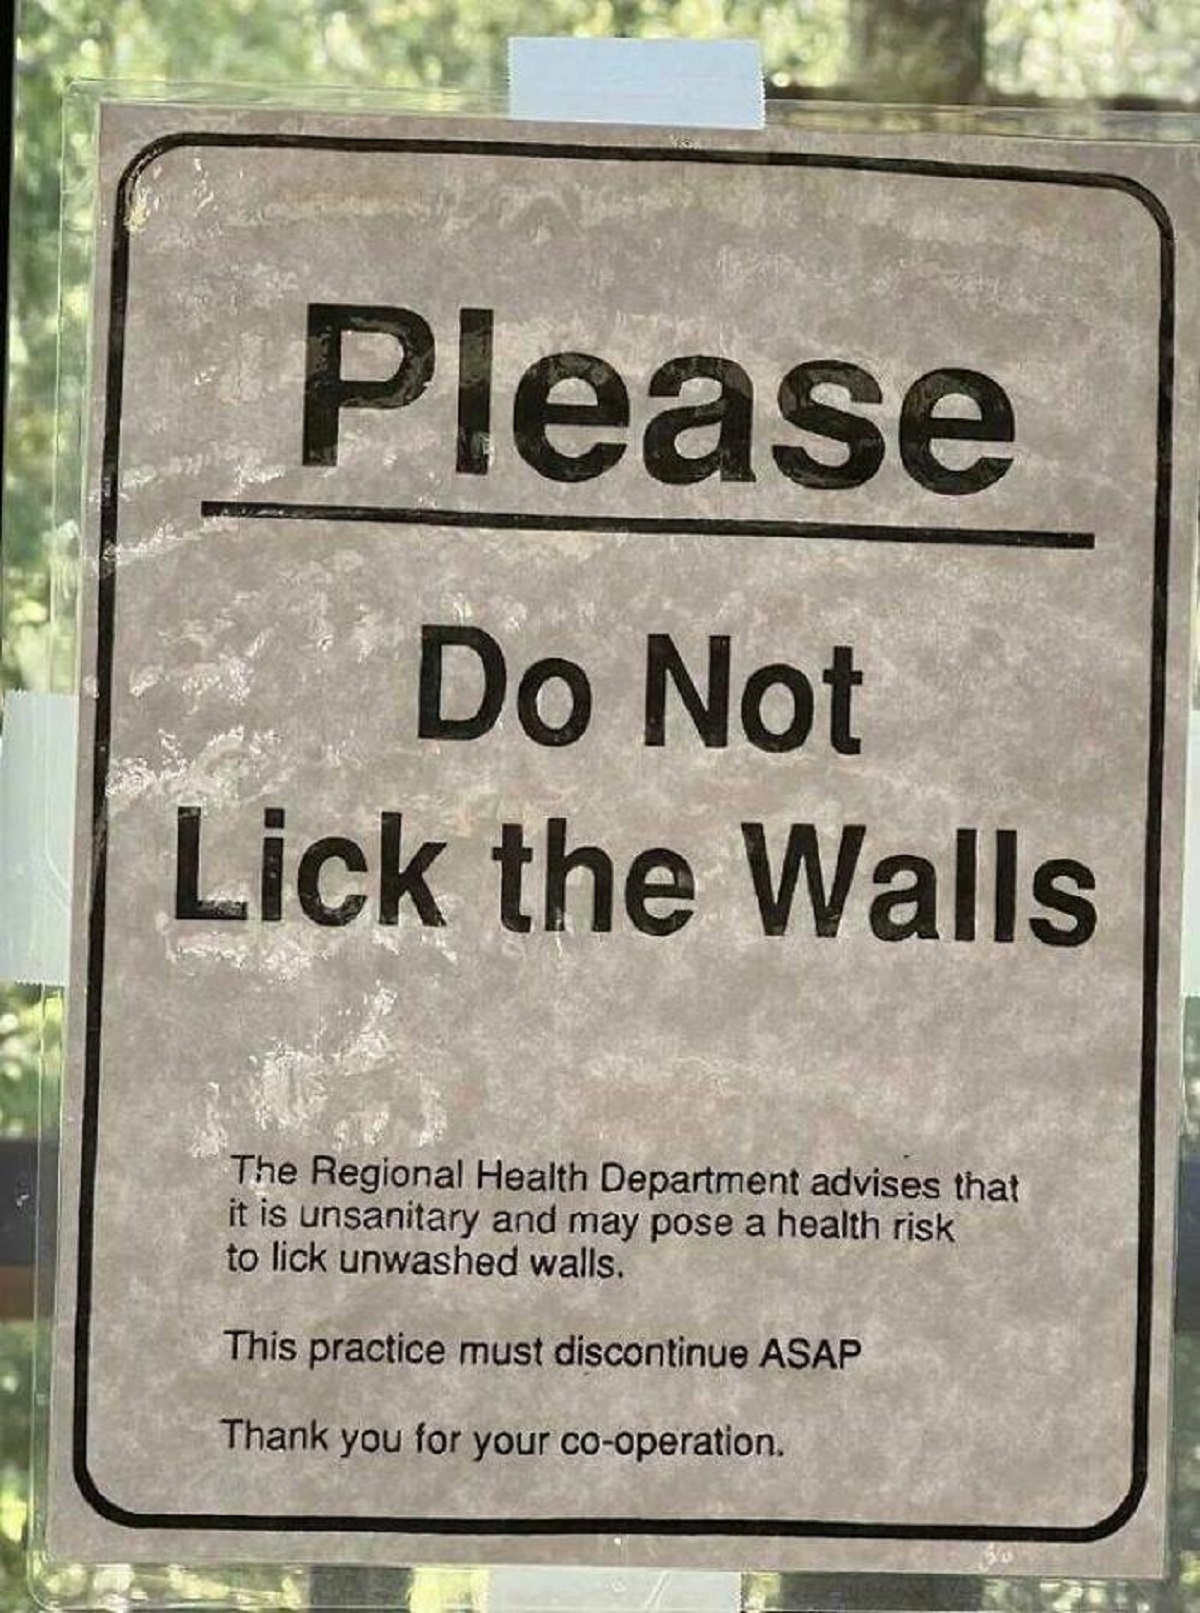 It's sad that we need a sign like this.